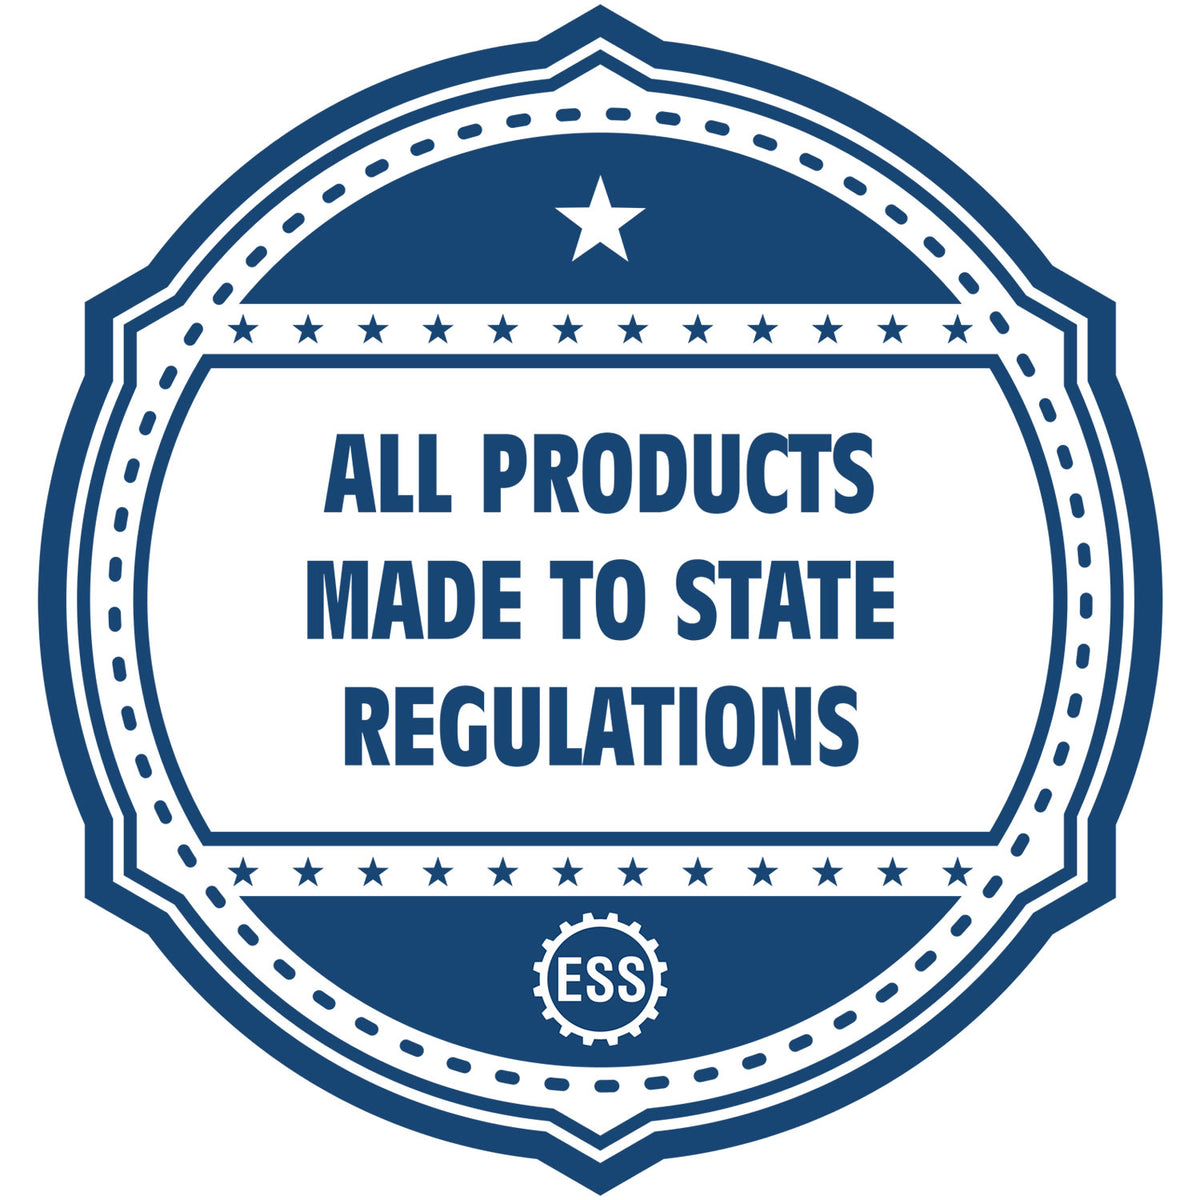 An icon or badge element for the PSI Oregon Notary Stamp showing that this product is made in compliance with state regulations.